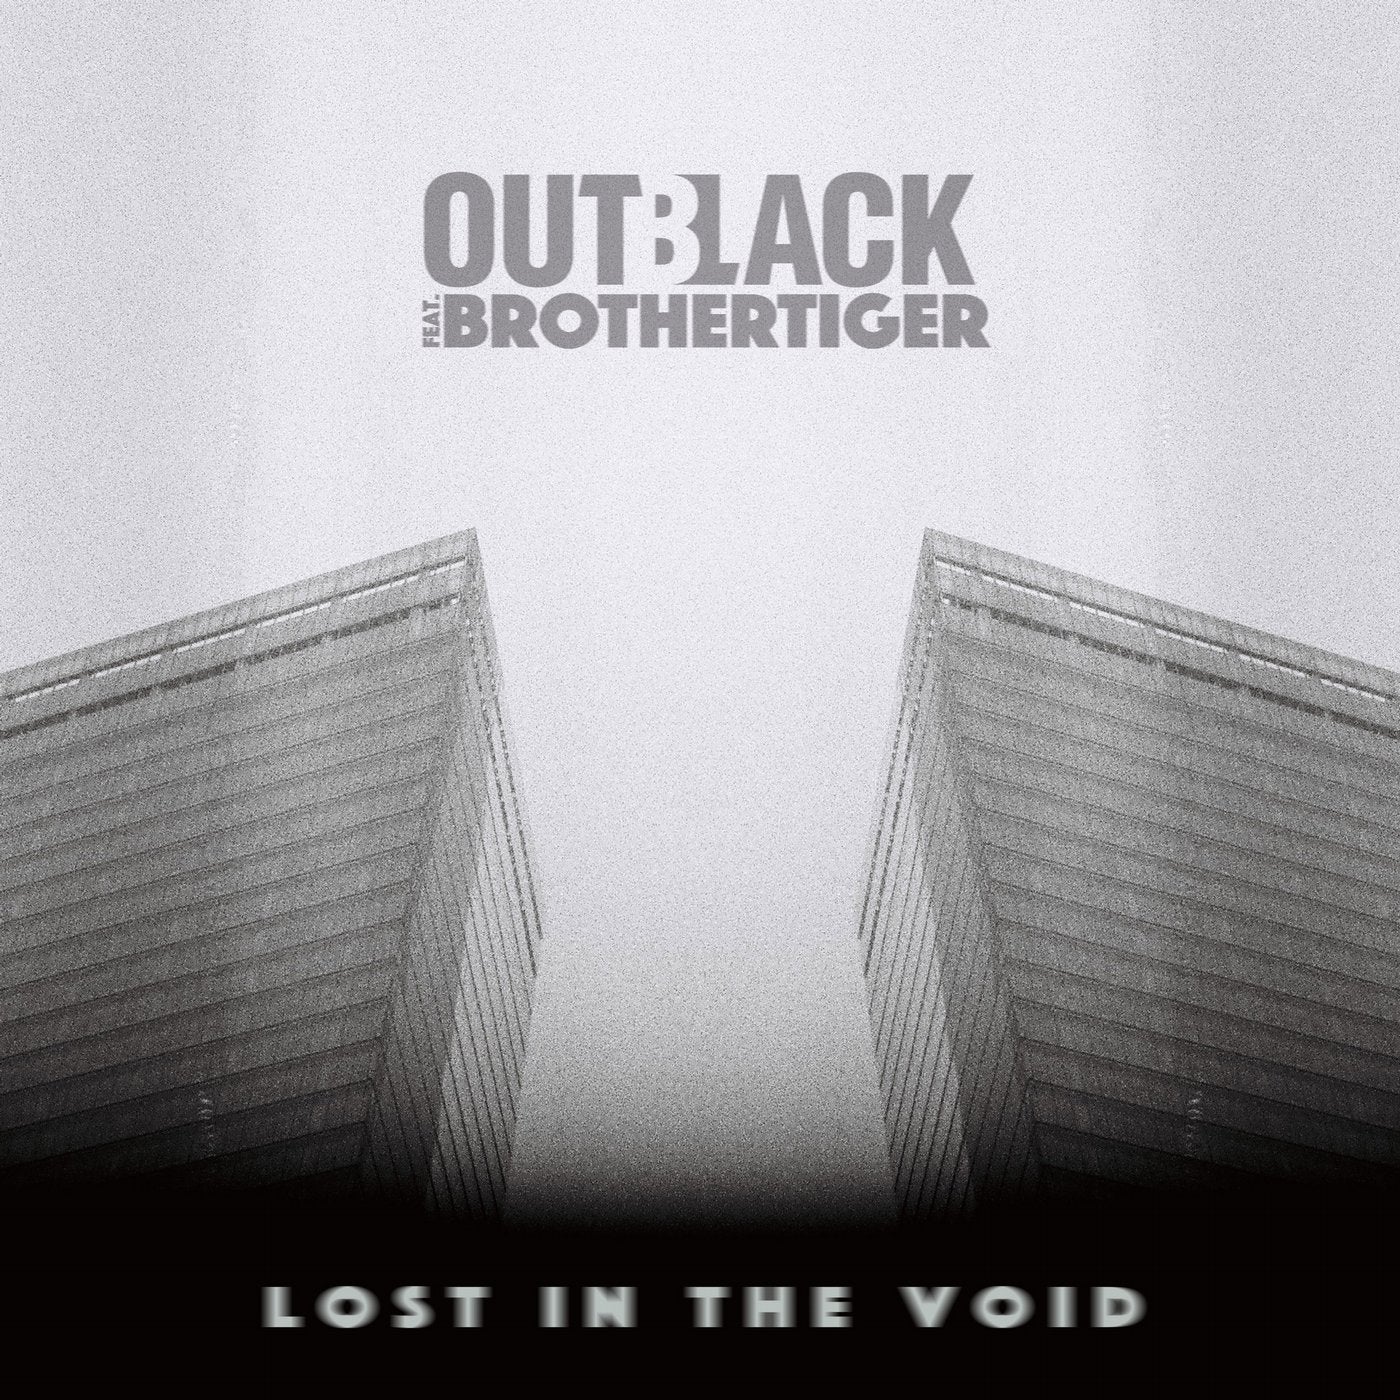 Lost in the Void (feat. Brothertiger)